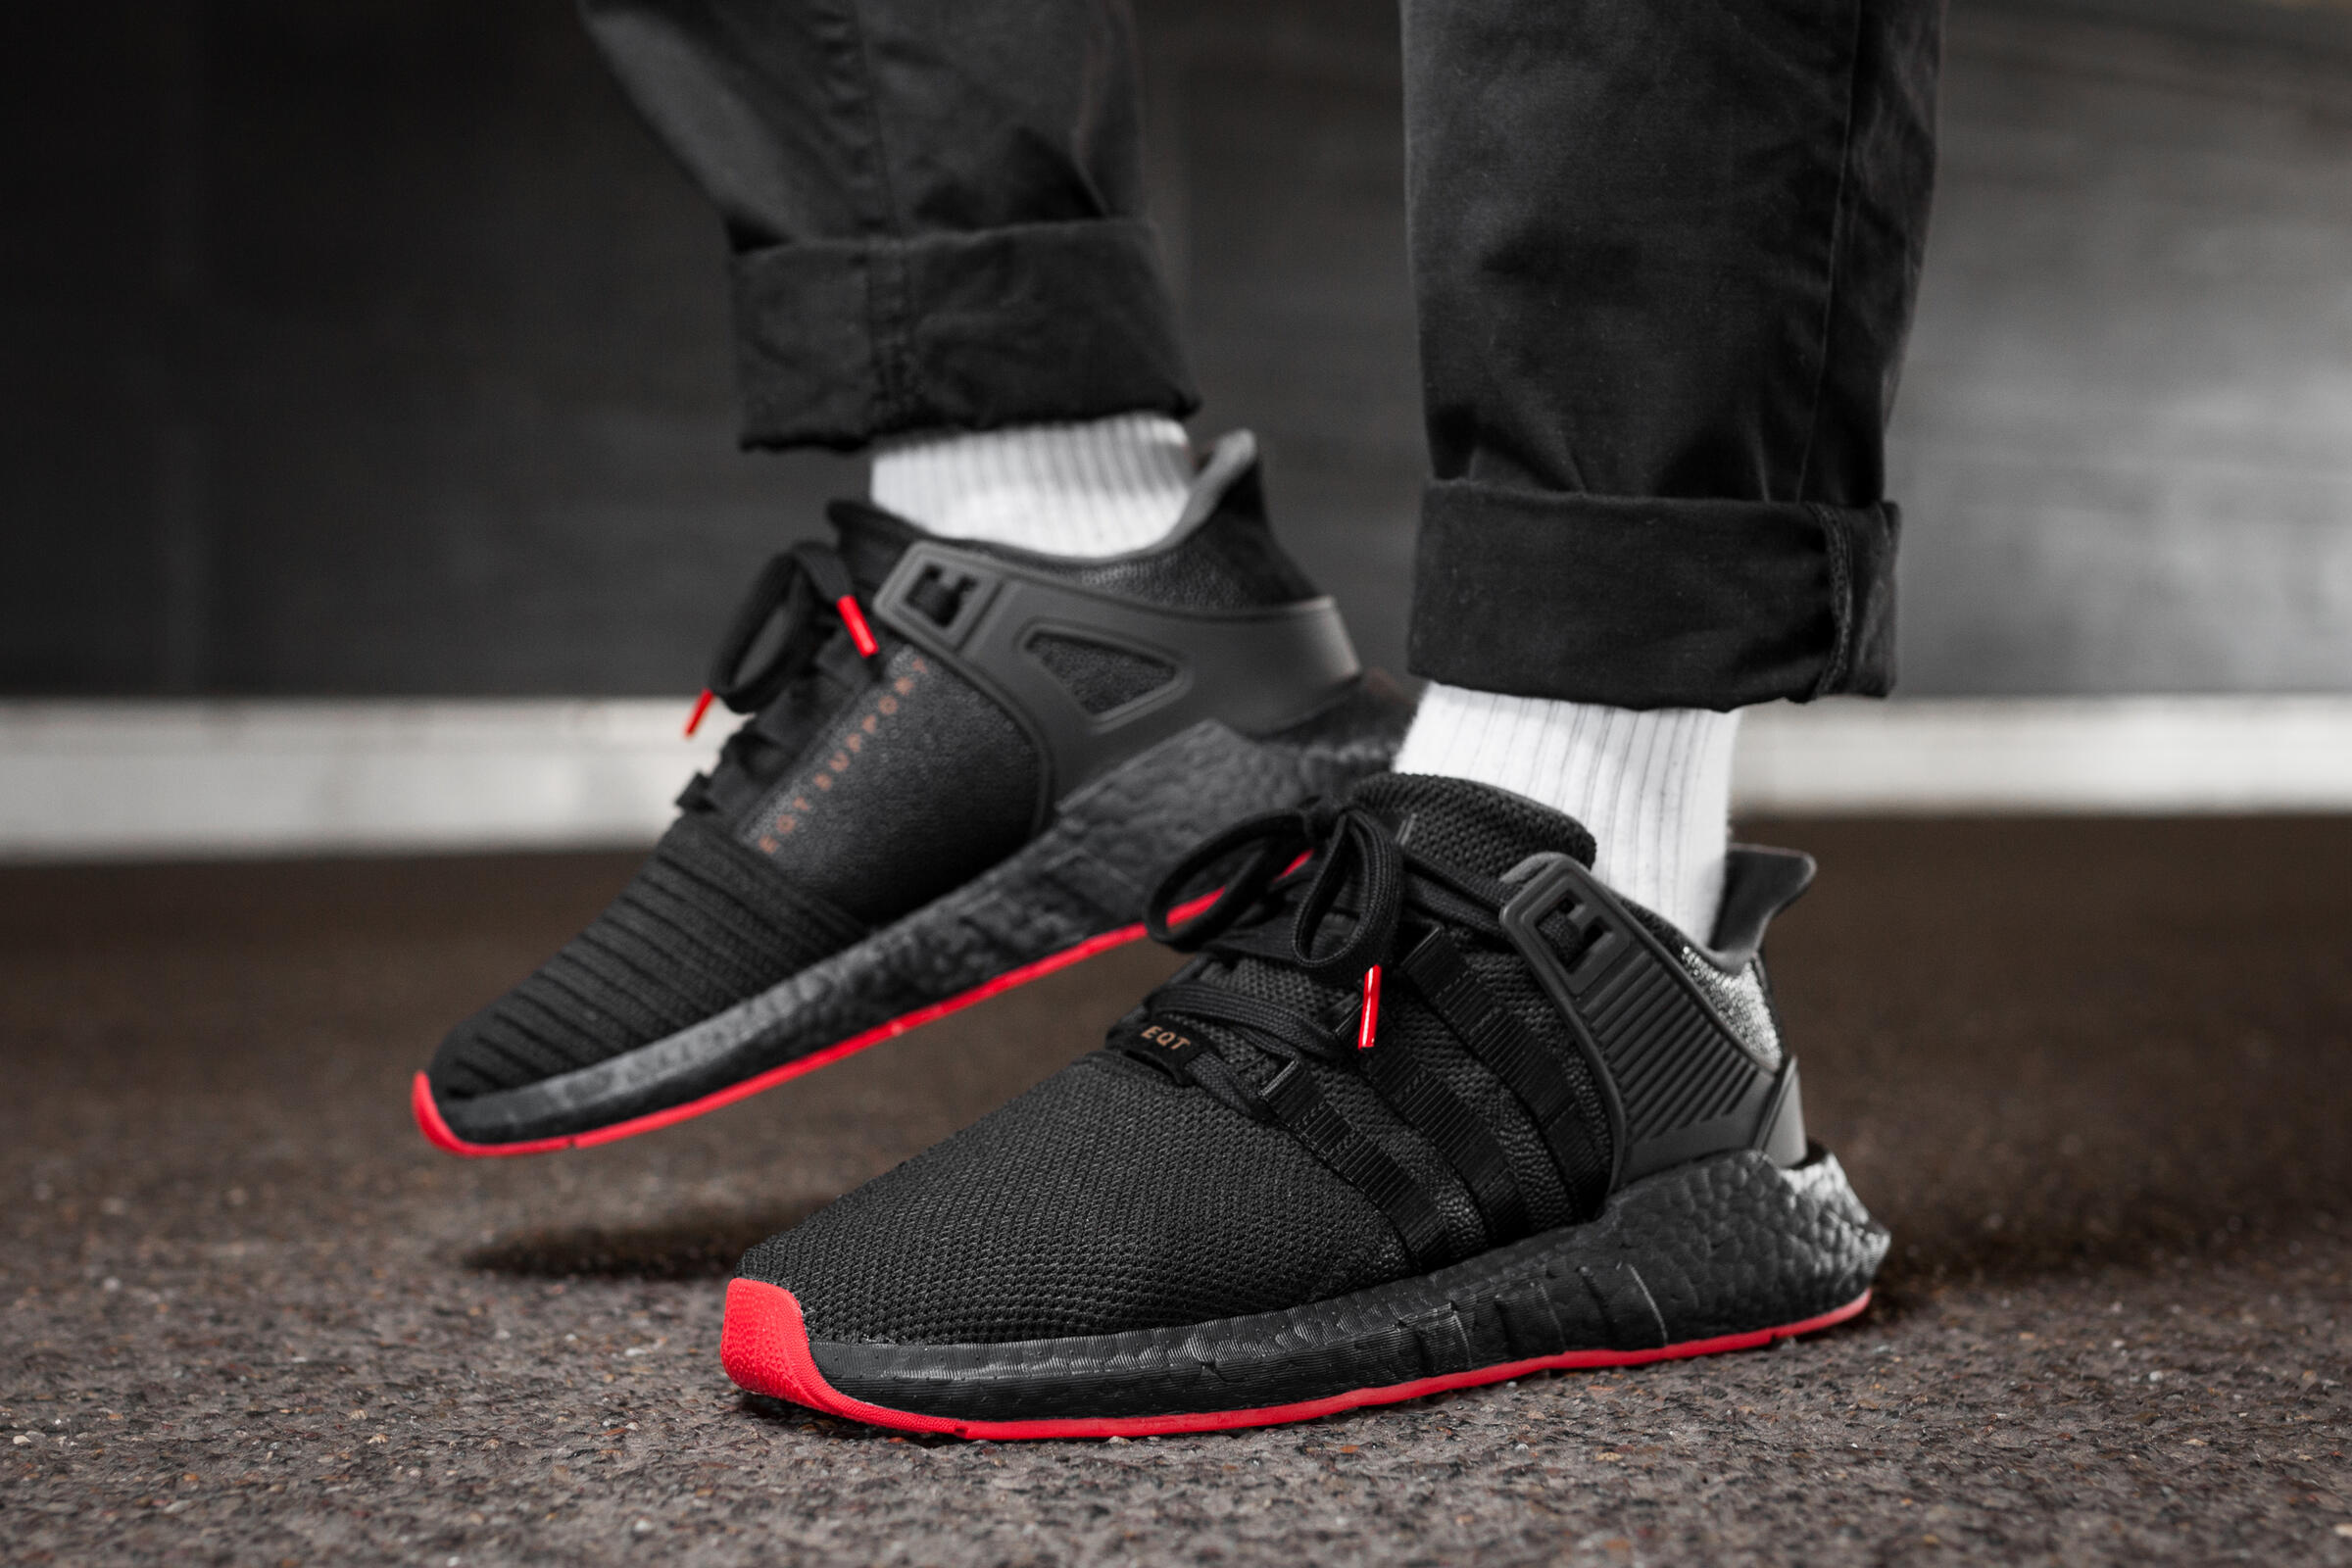 adidas Performance EQT Support 93/17 Red Carpet Pack